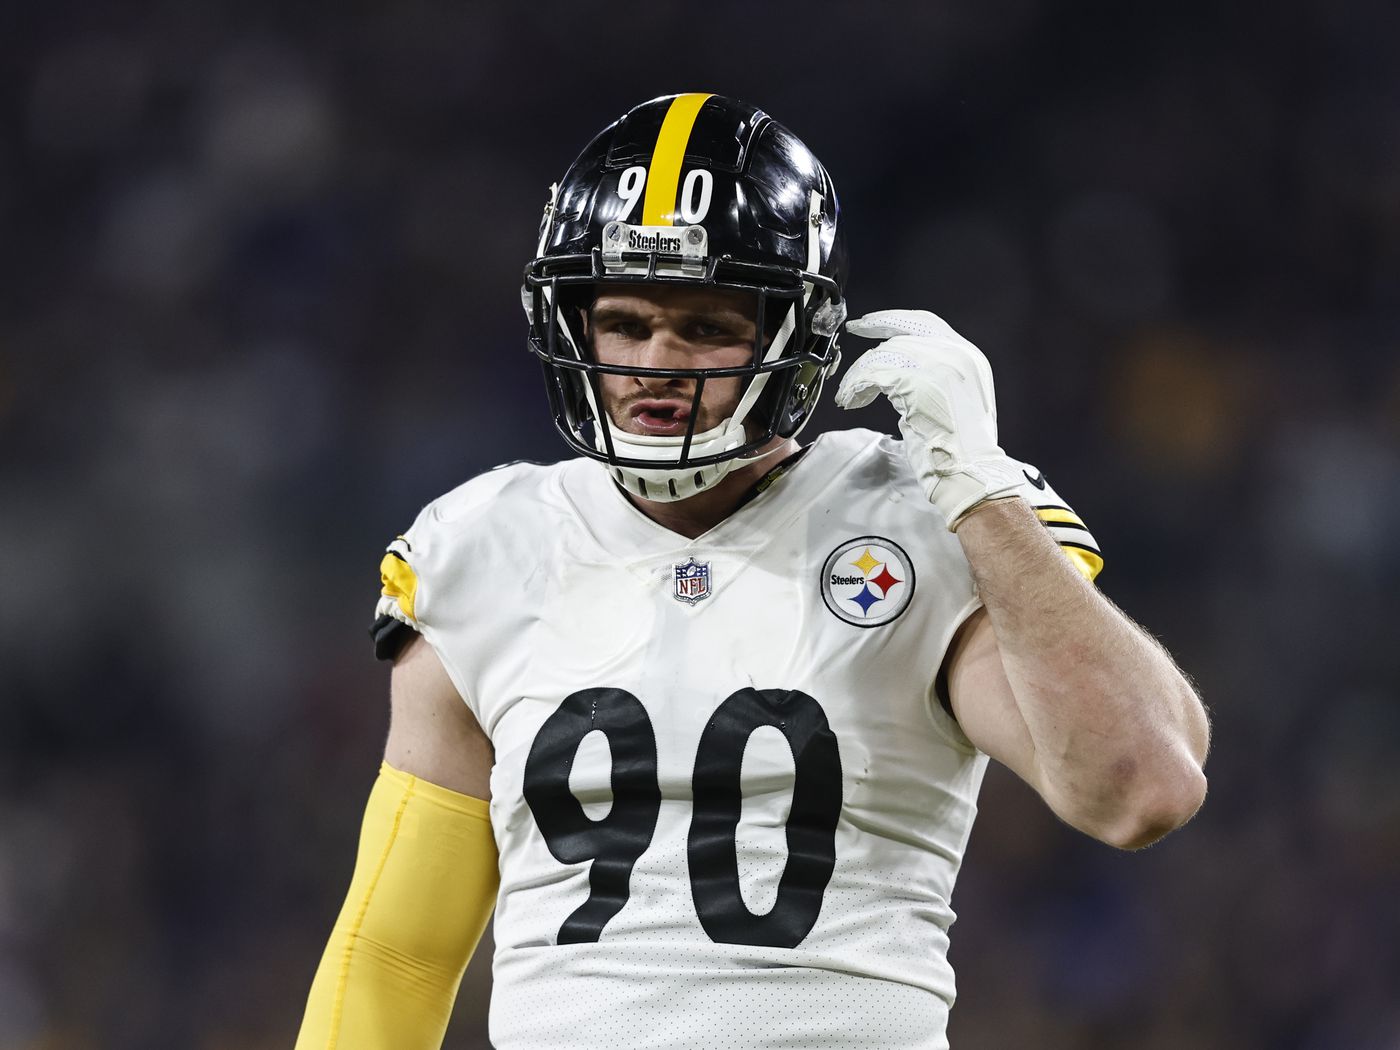 Steelers Vertex: Kenny Pickett's first NFL game showed his aggressiveness -  Behind the Steel Curtain